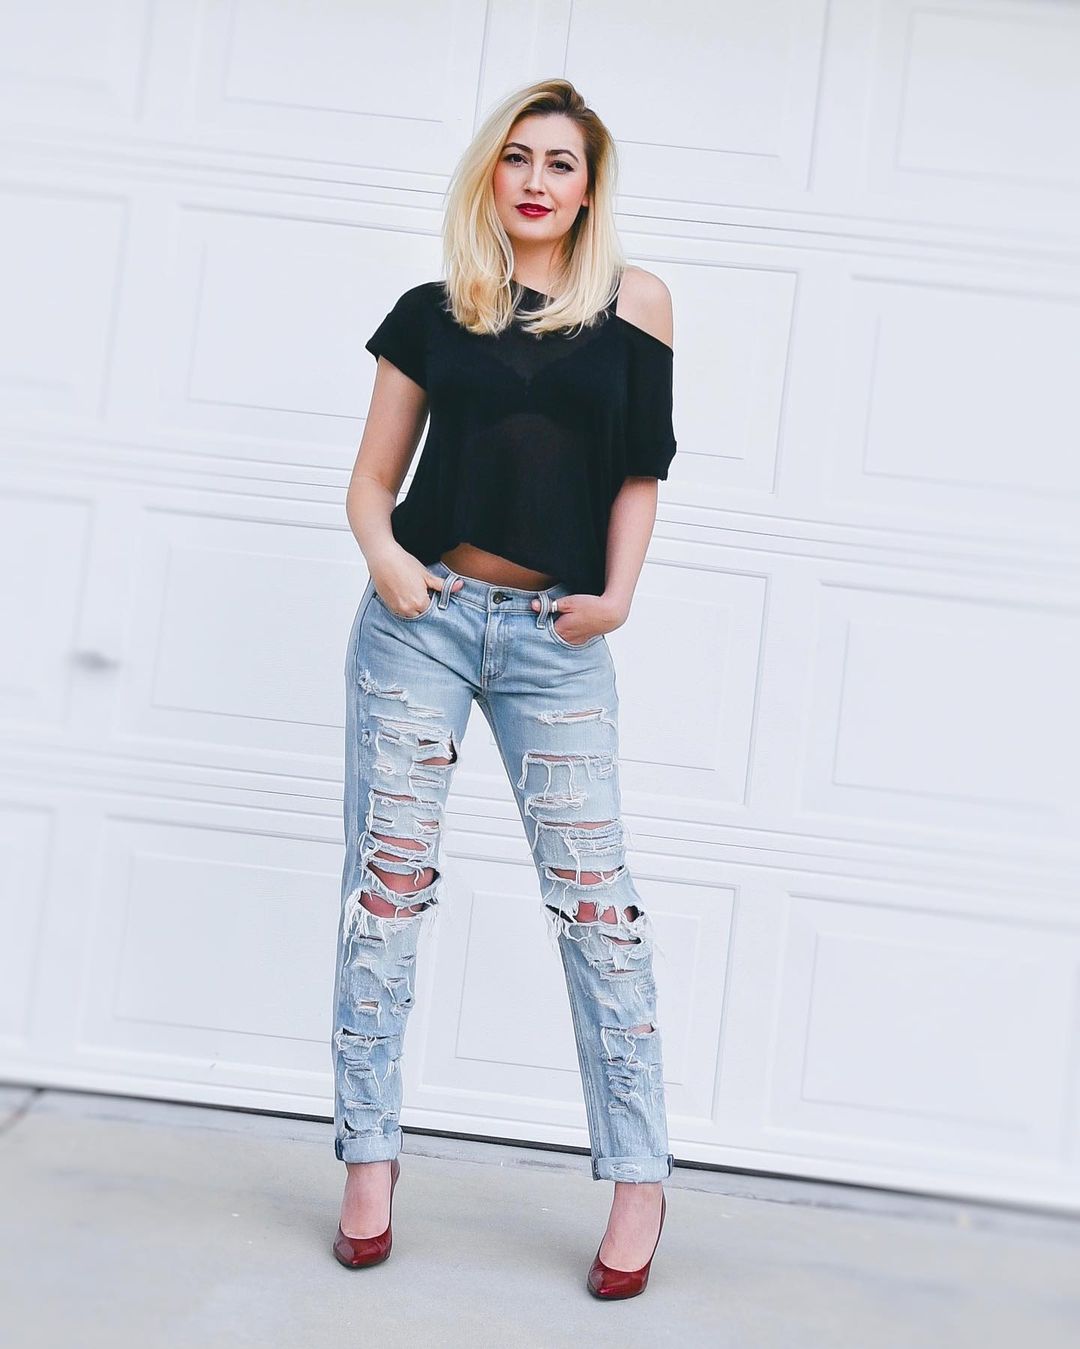 Sassy Babe In One-Shouldered Black Tee Paired With Ripped Denim Jeans